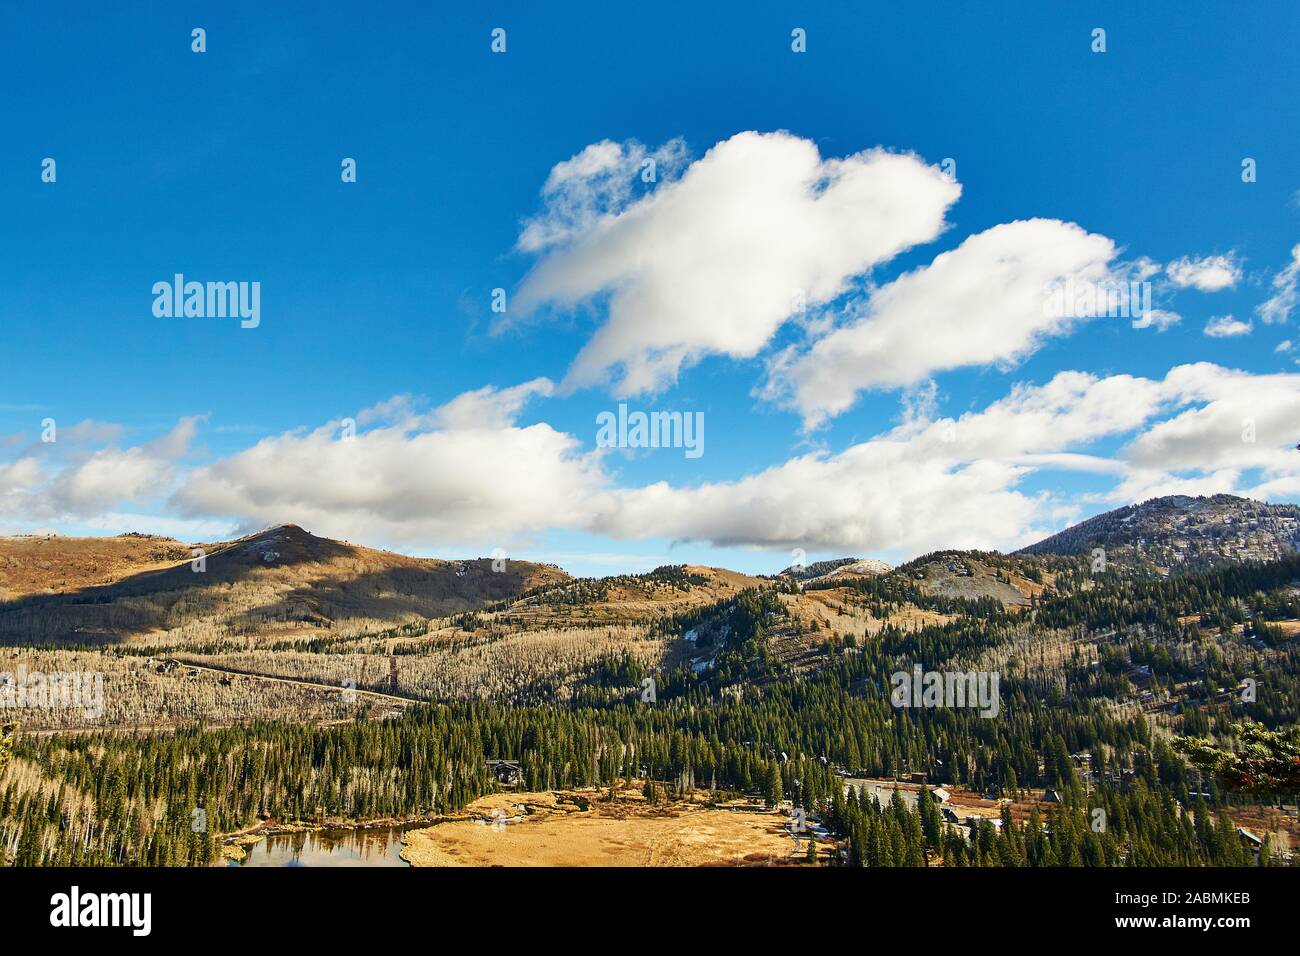 Autumn day at Silver Lake in Brighton, Utah, USA. Clouds in a bright blue sky cast shadows on the forested mountains. Stock Photo